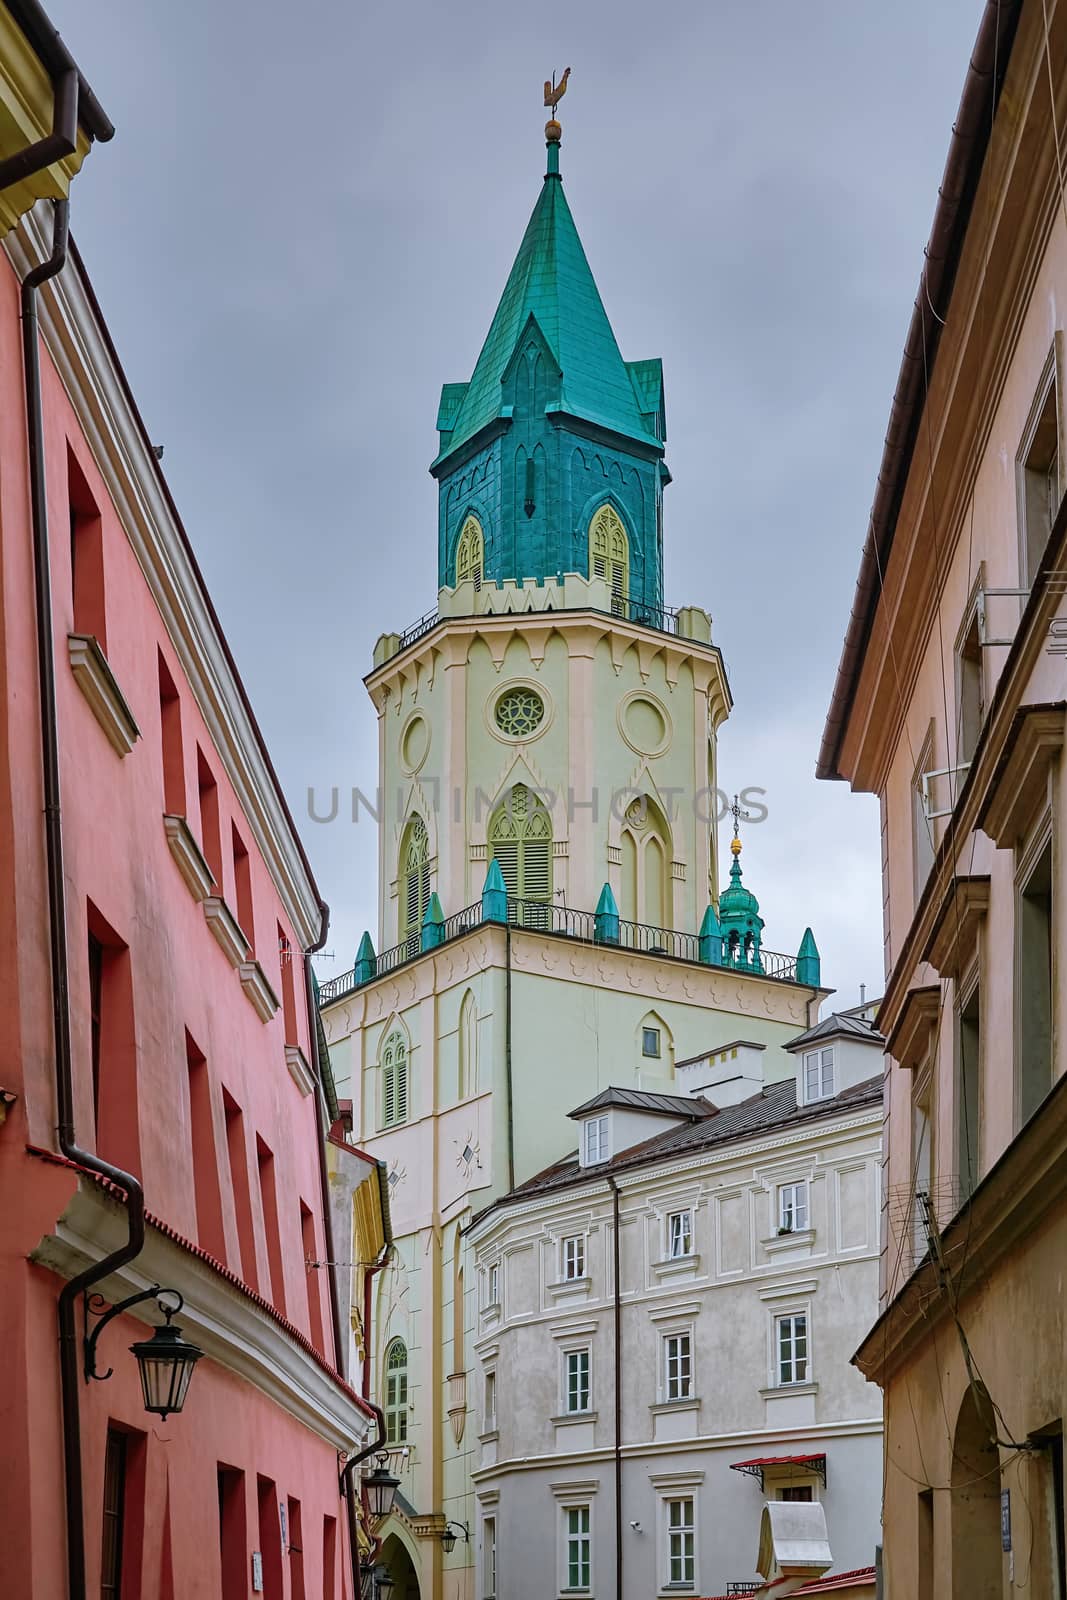 Trinity tower in old town of Lublin, Poland